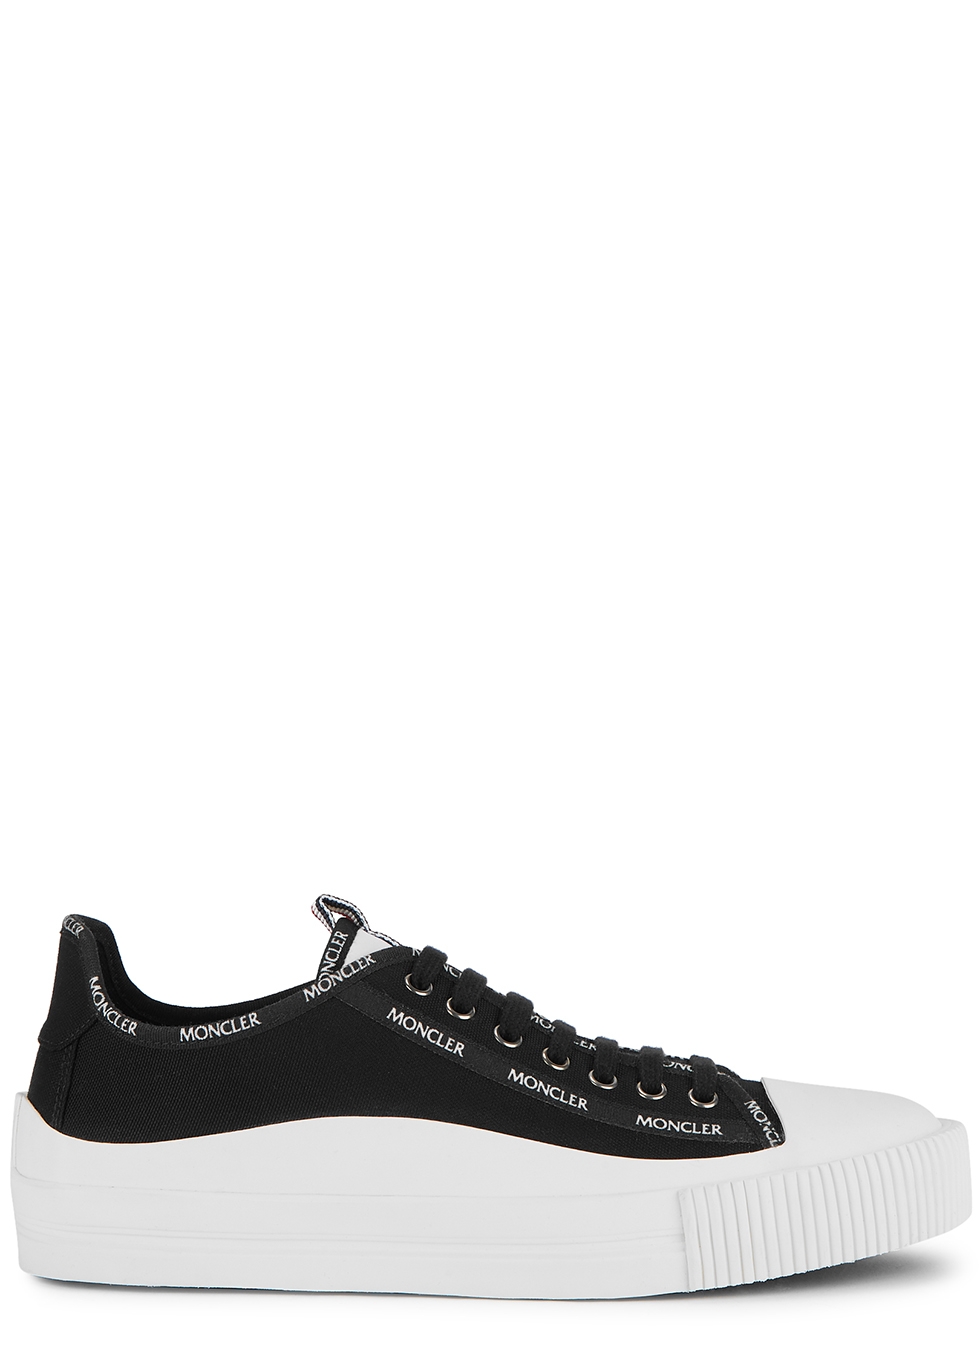 Moncler Glissiere black canvas sneakers incredible prices | sale at ...